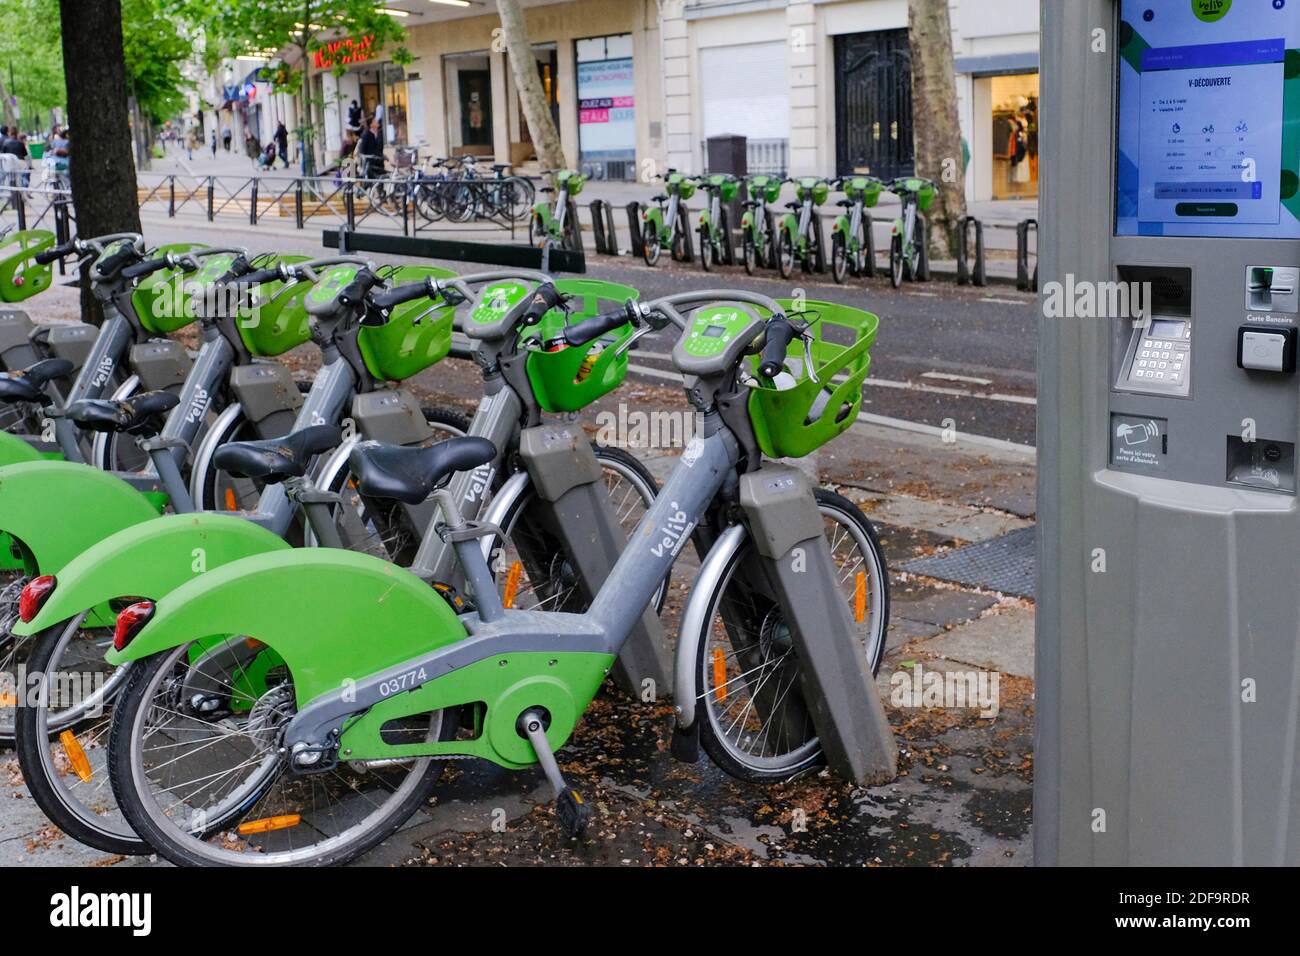 Velib bicycles for hire in Paris, The blue Velib is electric and the green  Velib is mechanical. Velib promises 19,000 bikes and increased maintenance,  The Velib Metropole union is preparing for strong